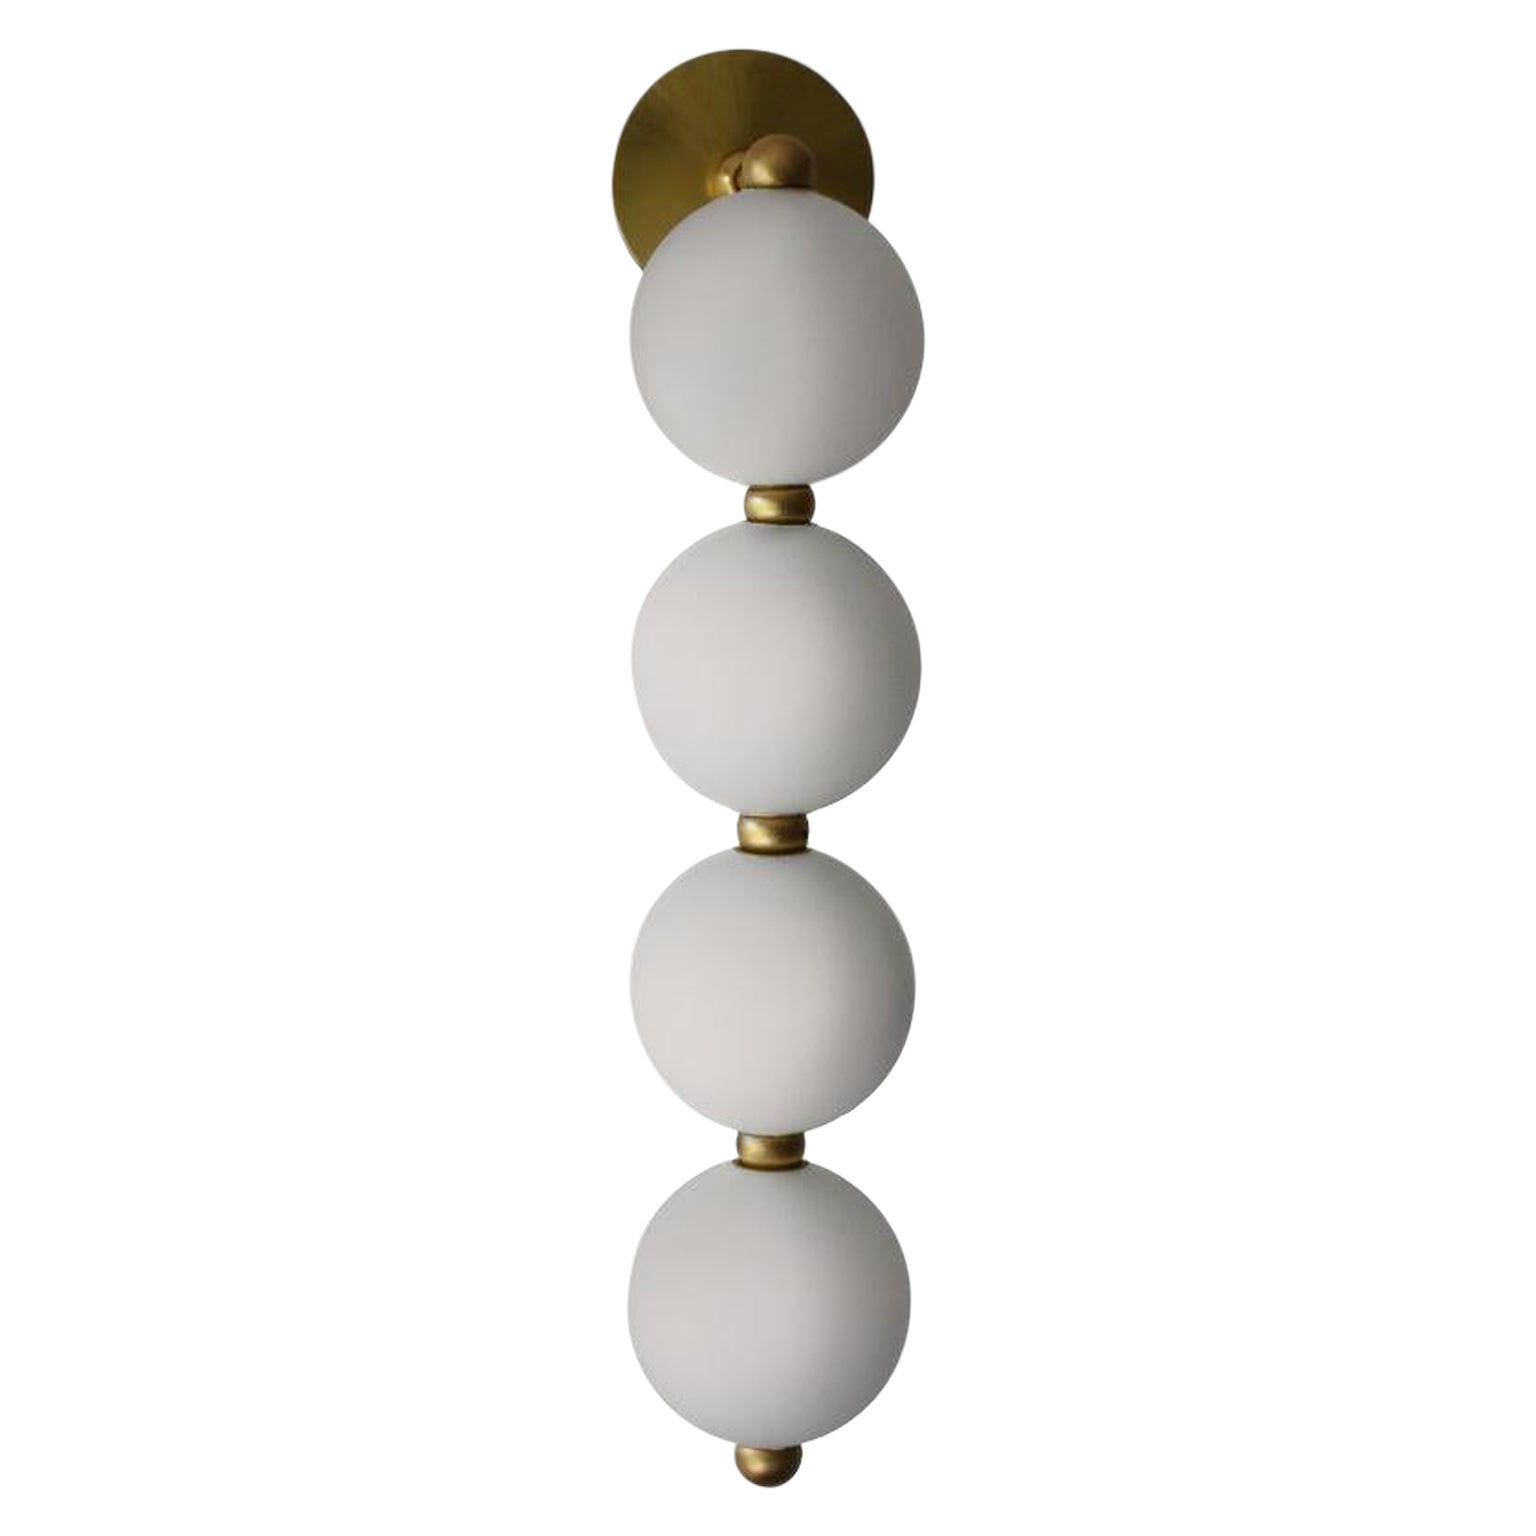 Perls Earing Wandleuchte by Ludovic Clément D'armont im Angebot